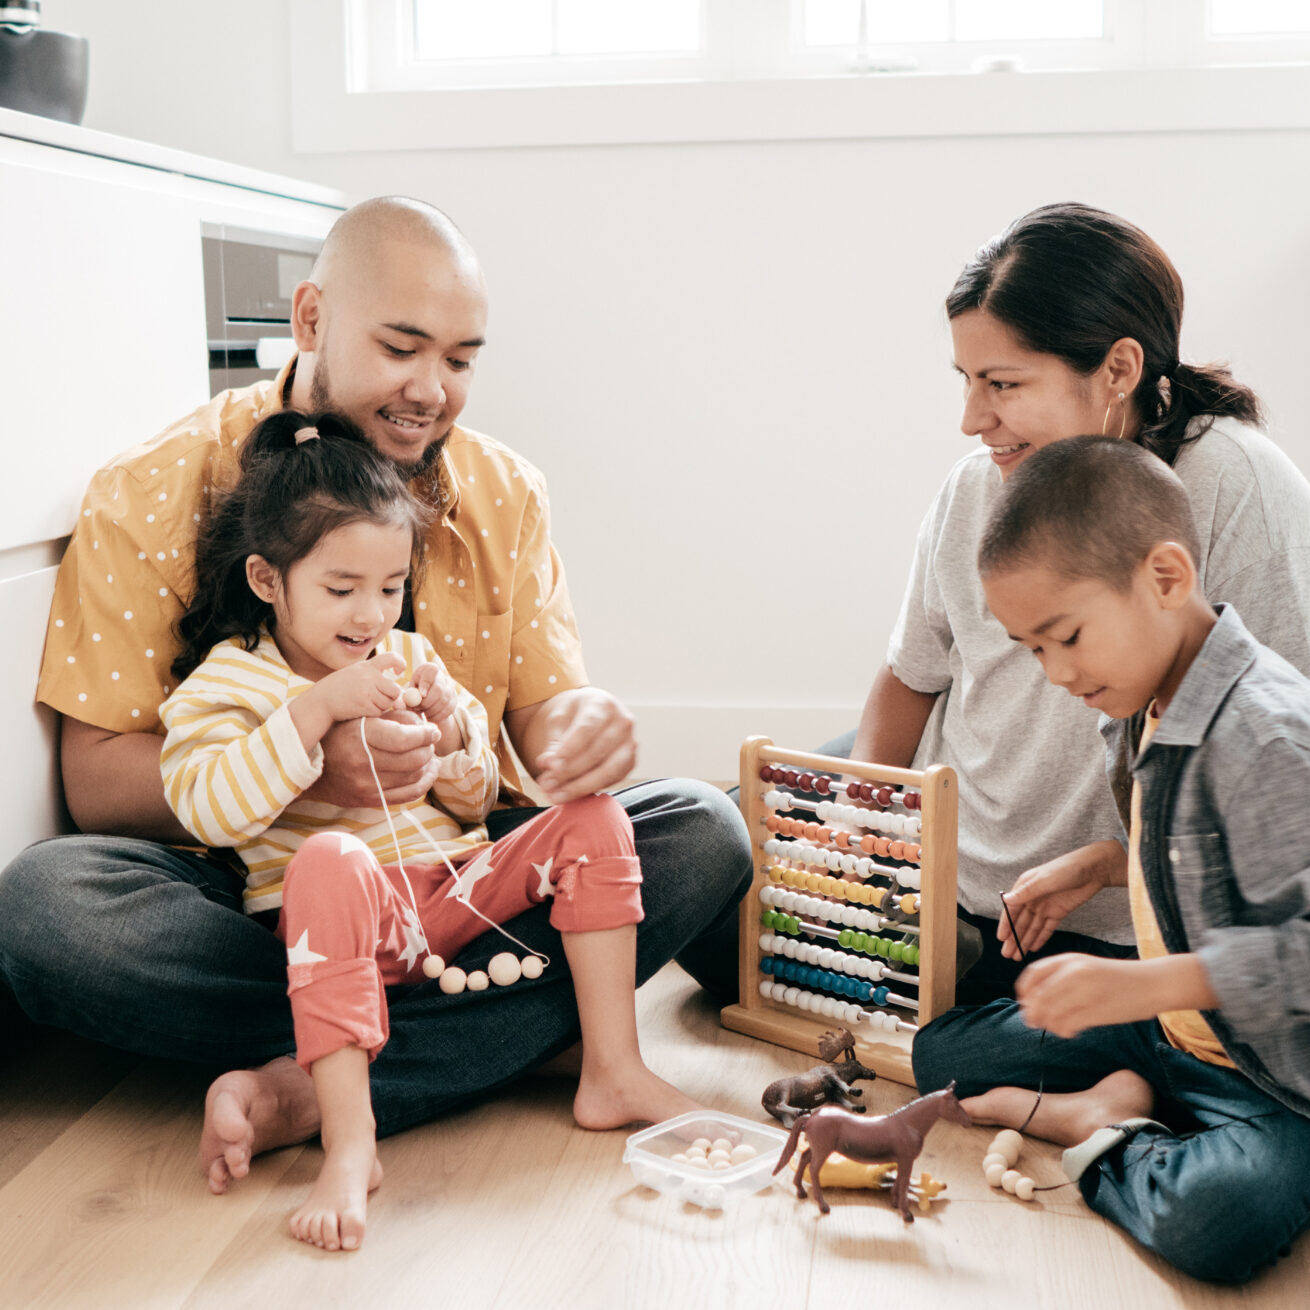 A family of 4 playing with toys on the floor